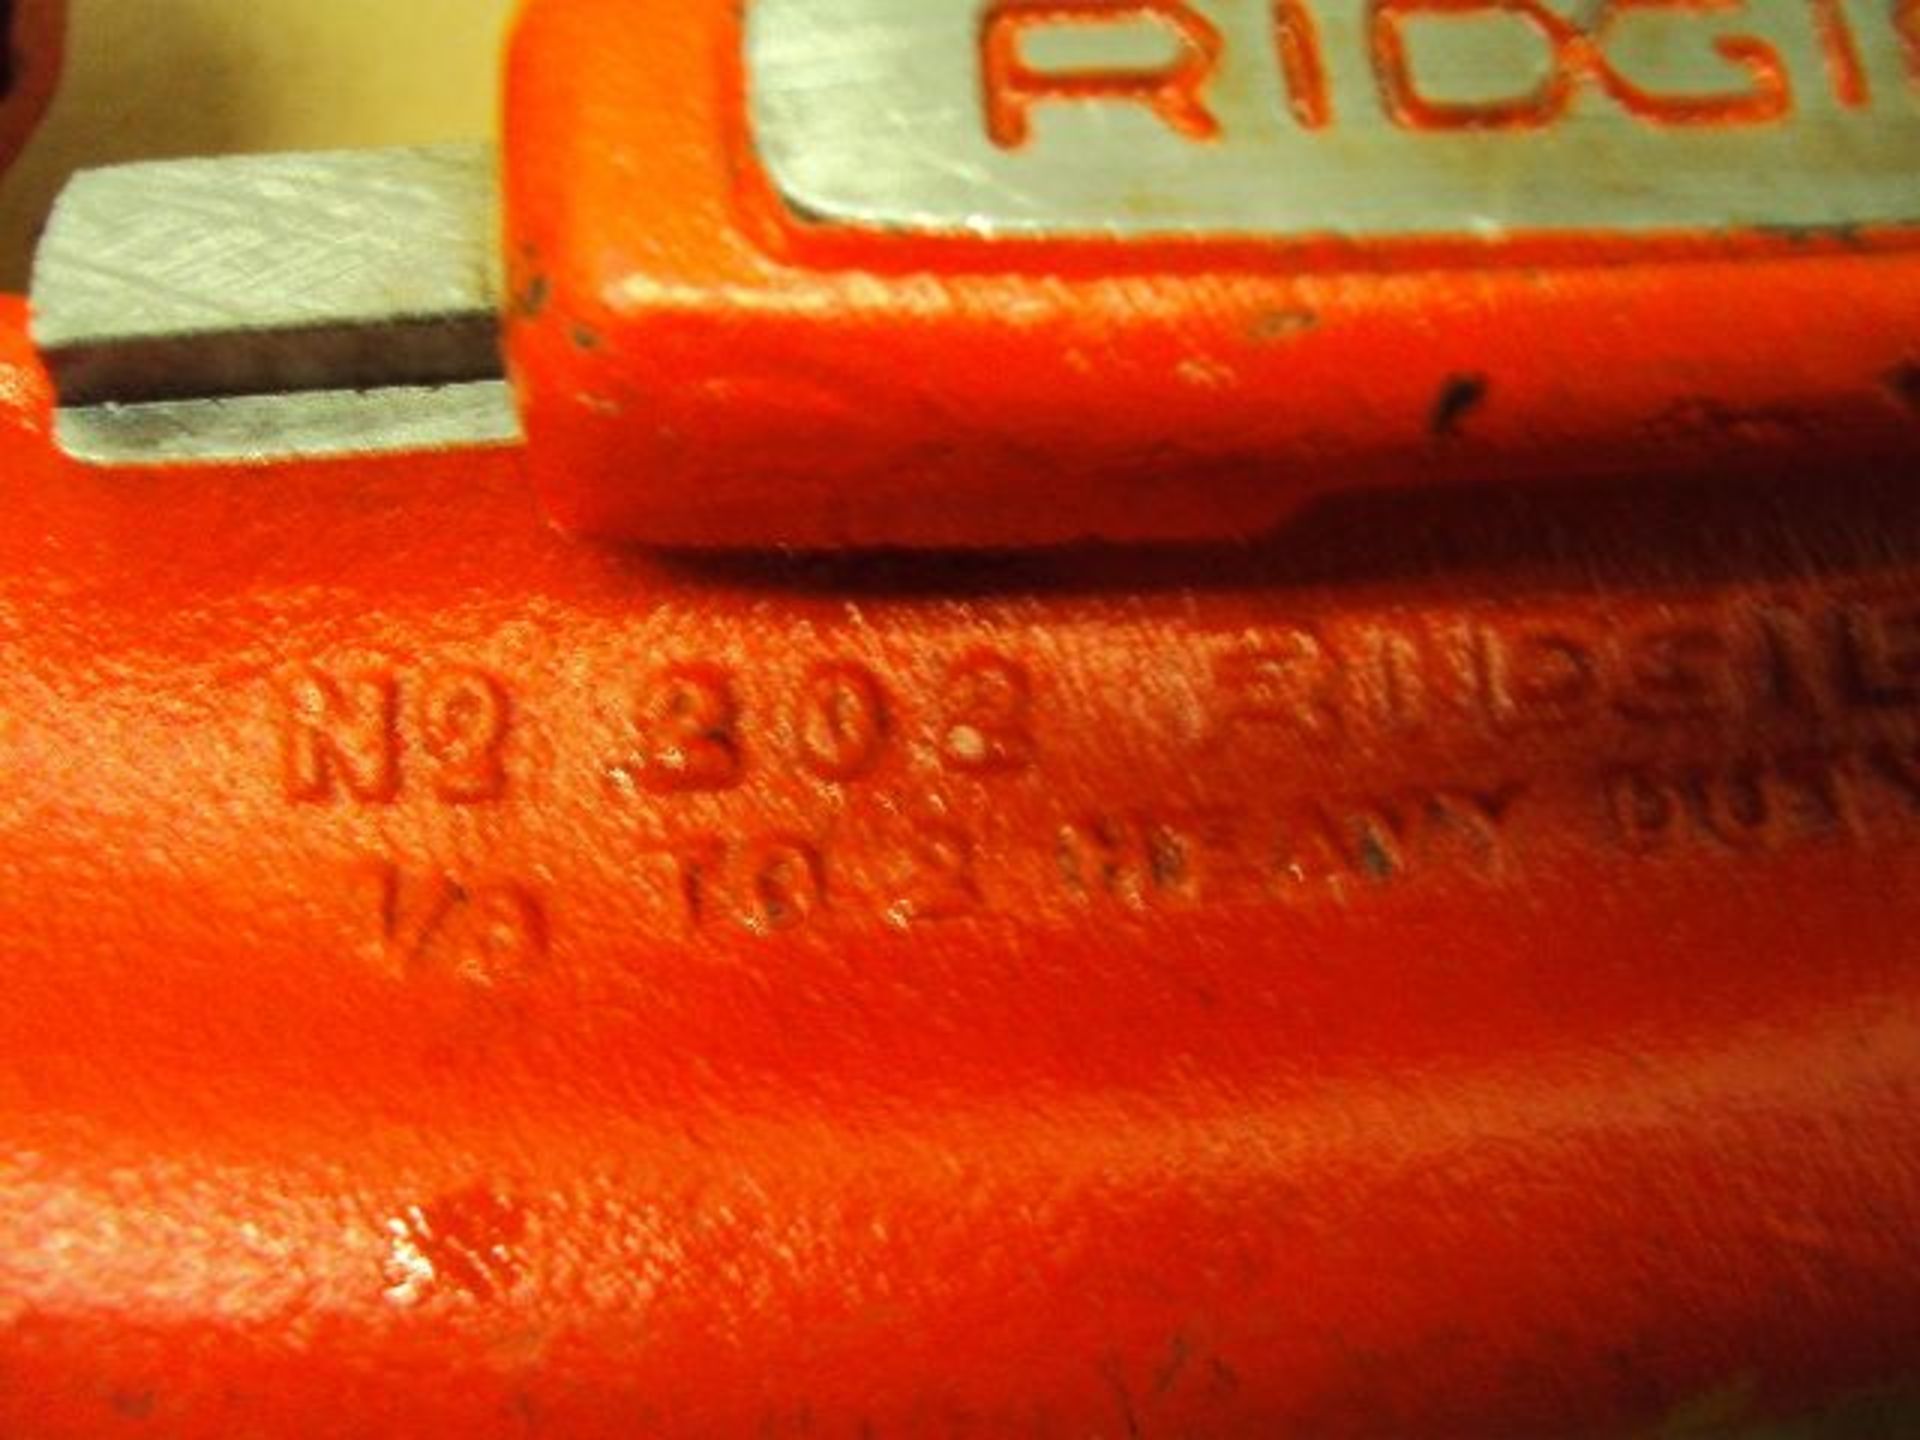 Ridgid No. 202 1/8” to 2” Pipe Cutter /256 - Image 3 of 3